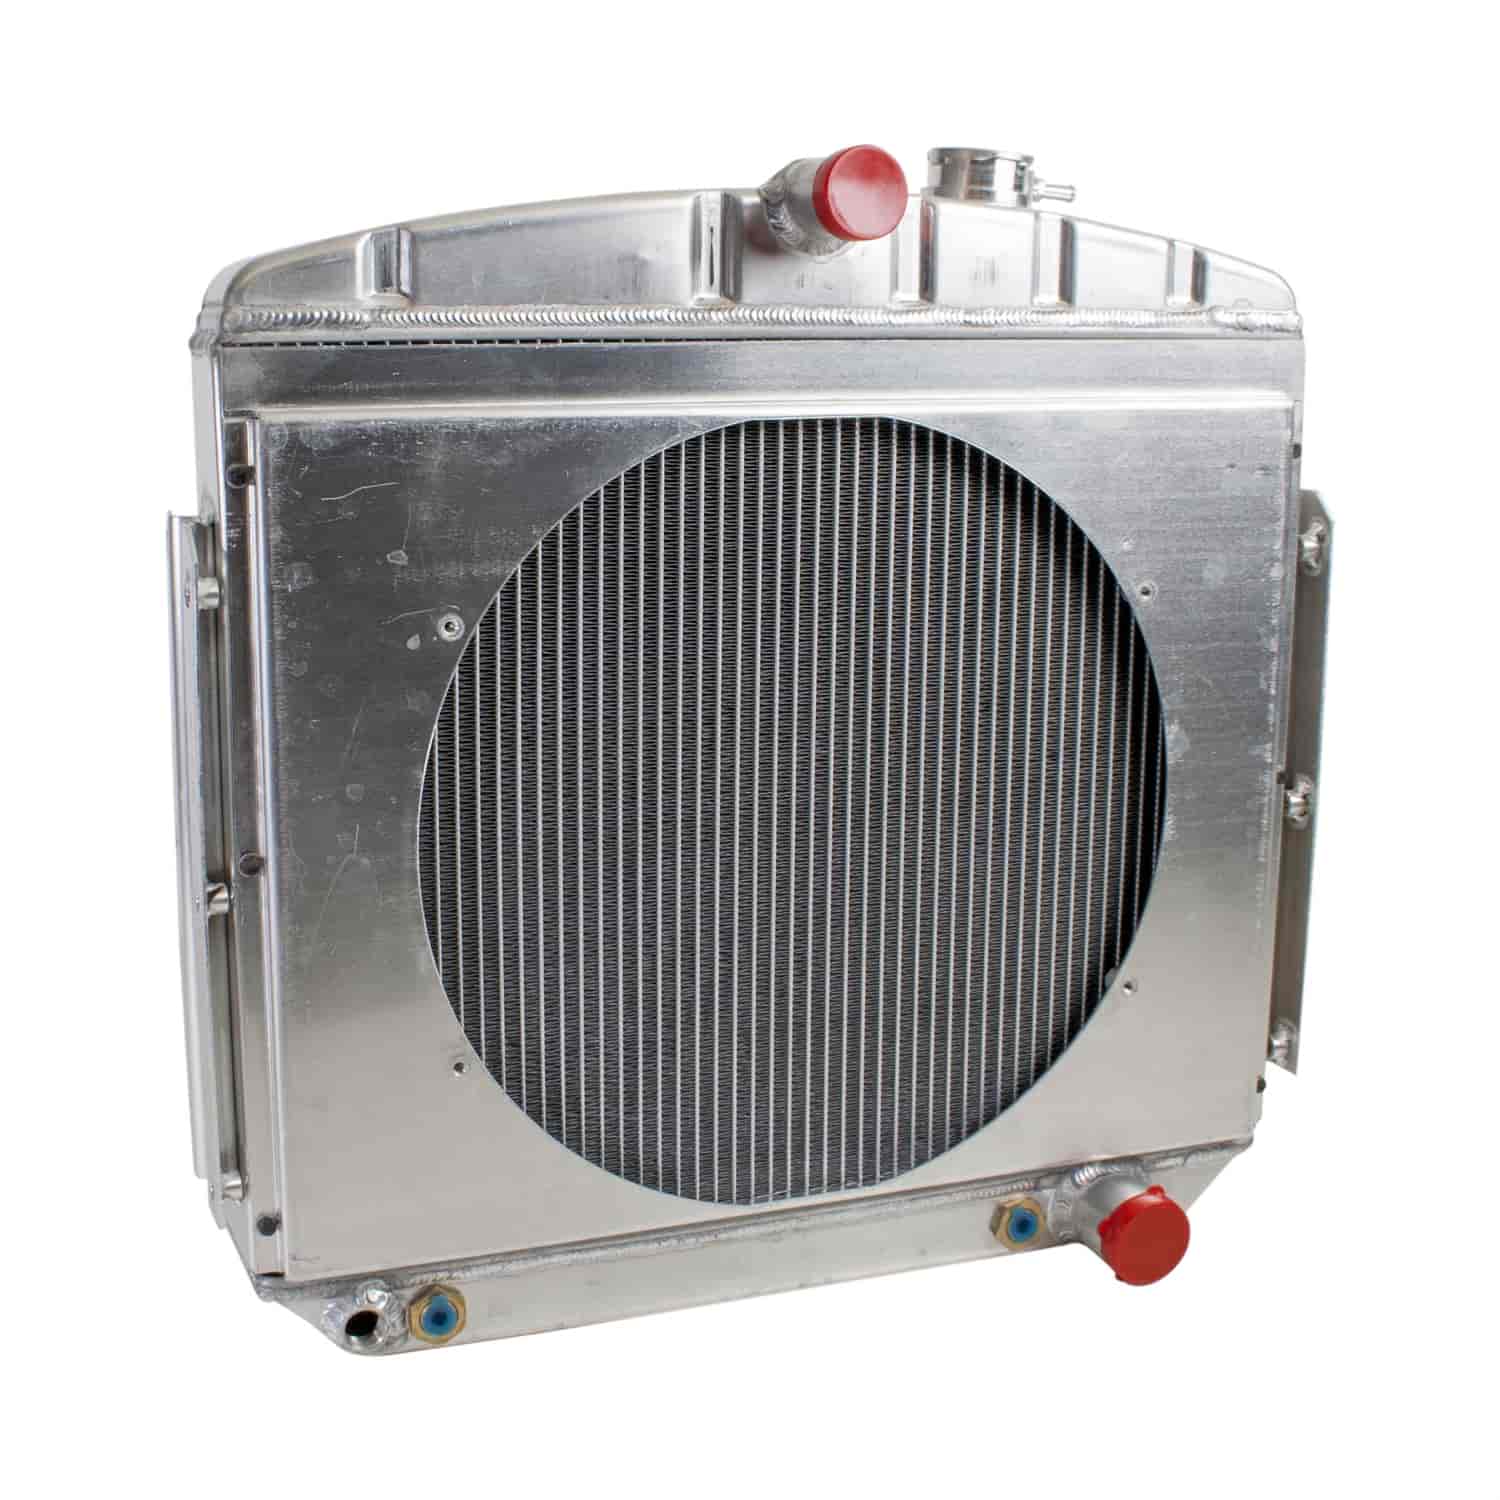 PerformanceFit Radiator 1955-1957 Tri Five Chevy with Transmission Cooler